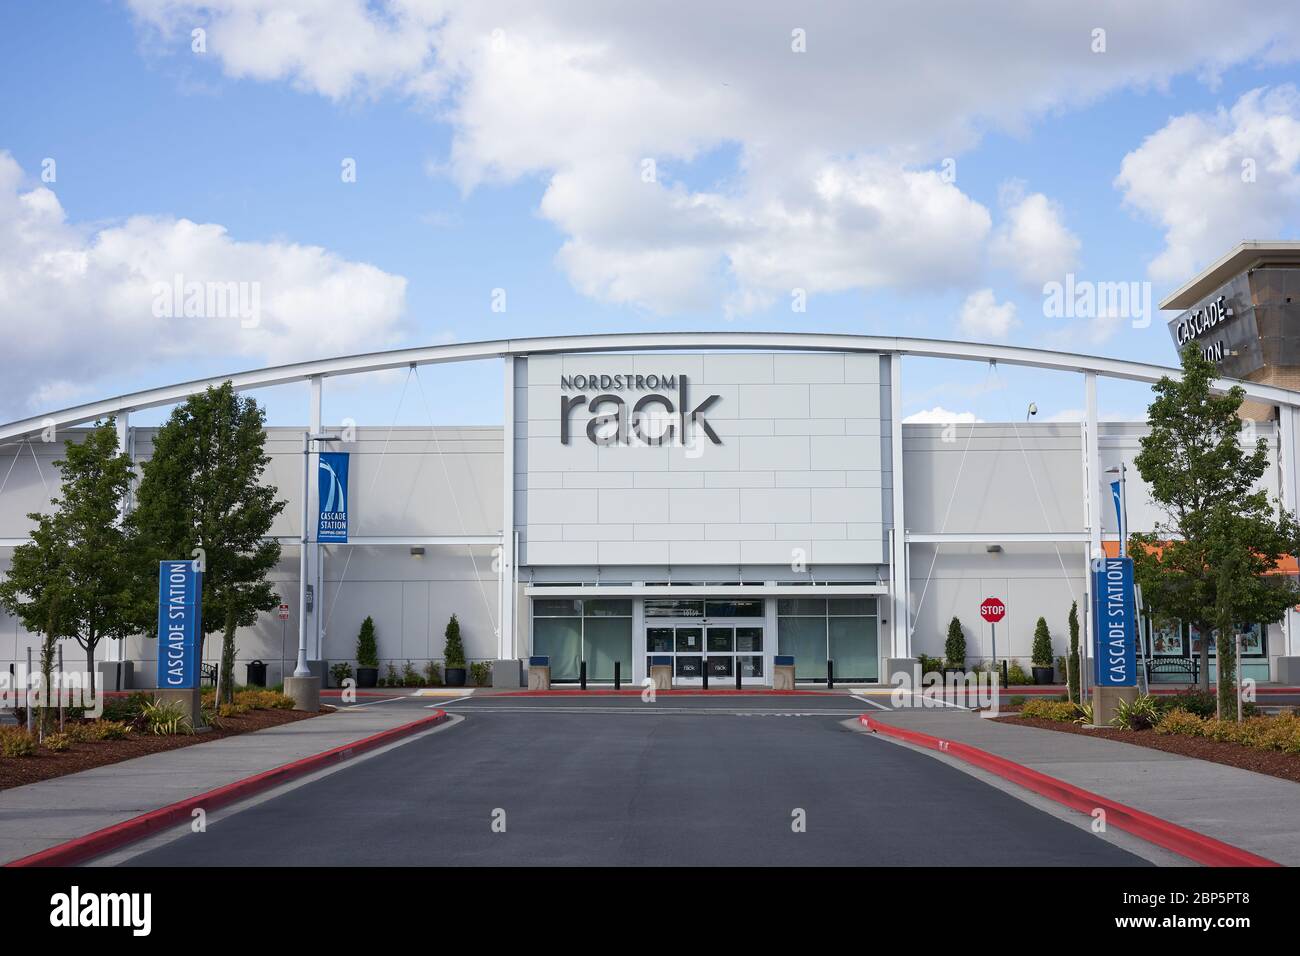 Portland, OR, USA - May 6, 2020: Closed Nordstrom Rack store in Northeast Portland, Oregon, during the coronavirus pandemic. Stock Photo